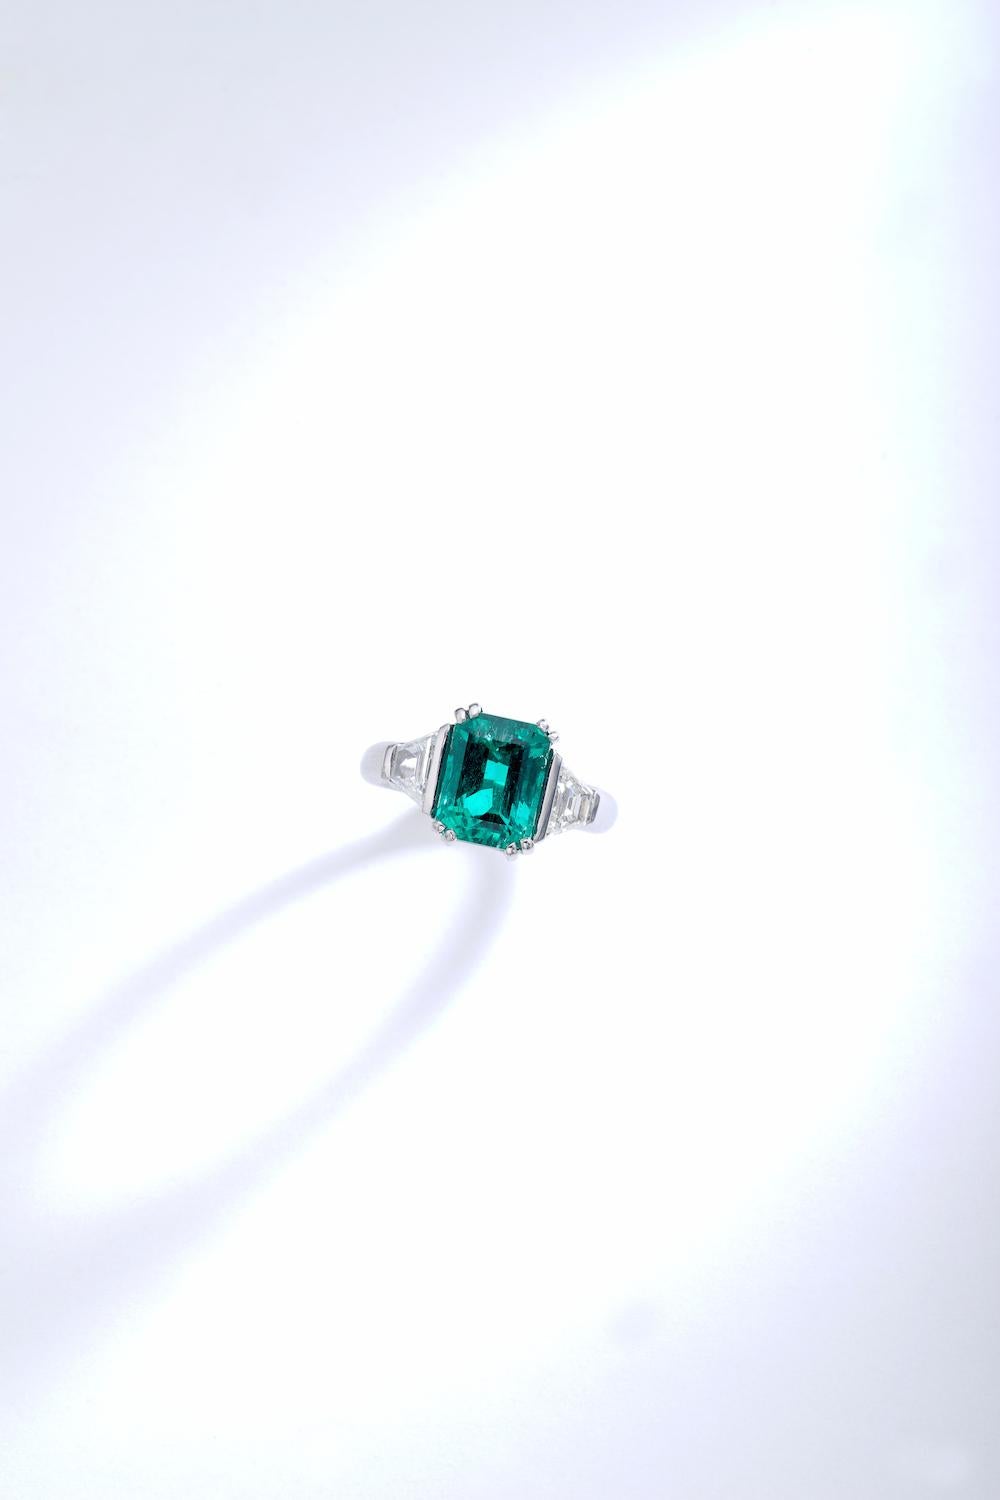 Emerald Cut 2.60 Carat Colombian Emerald Diamond and Platinum French Ring